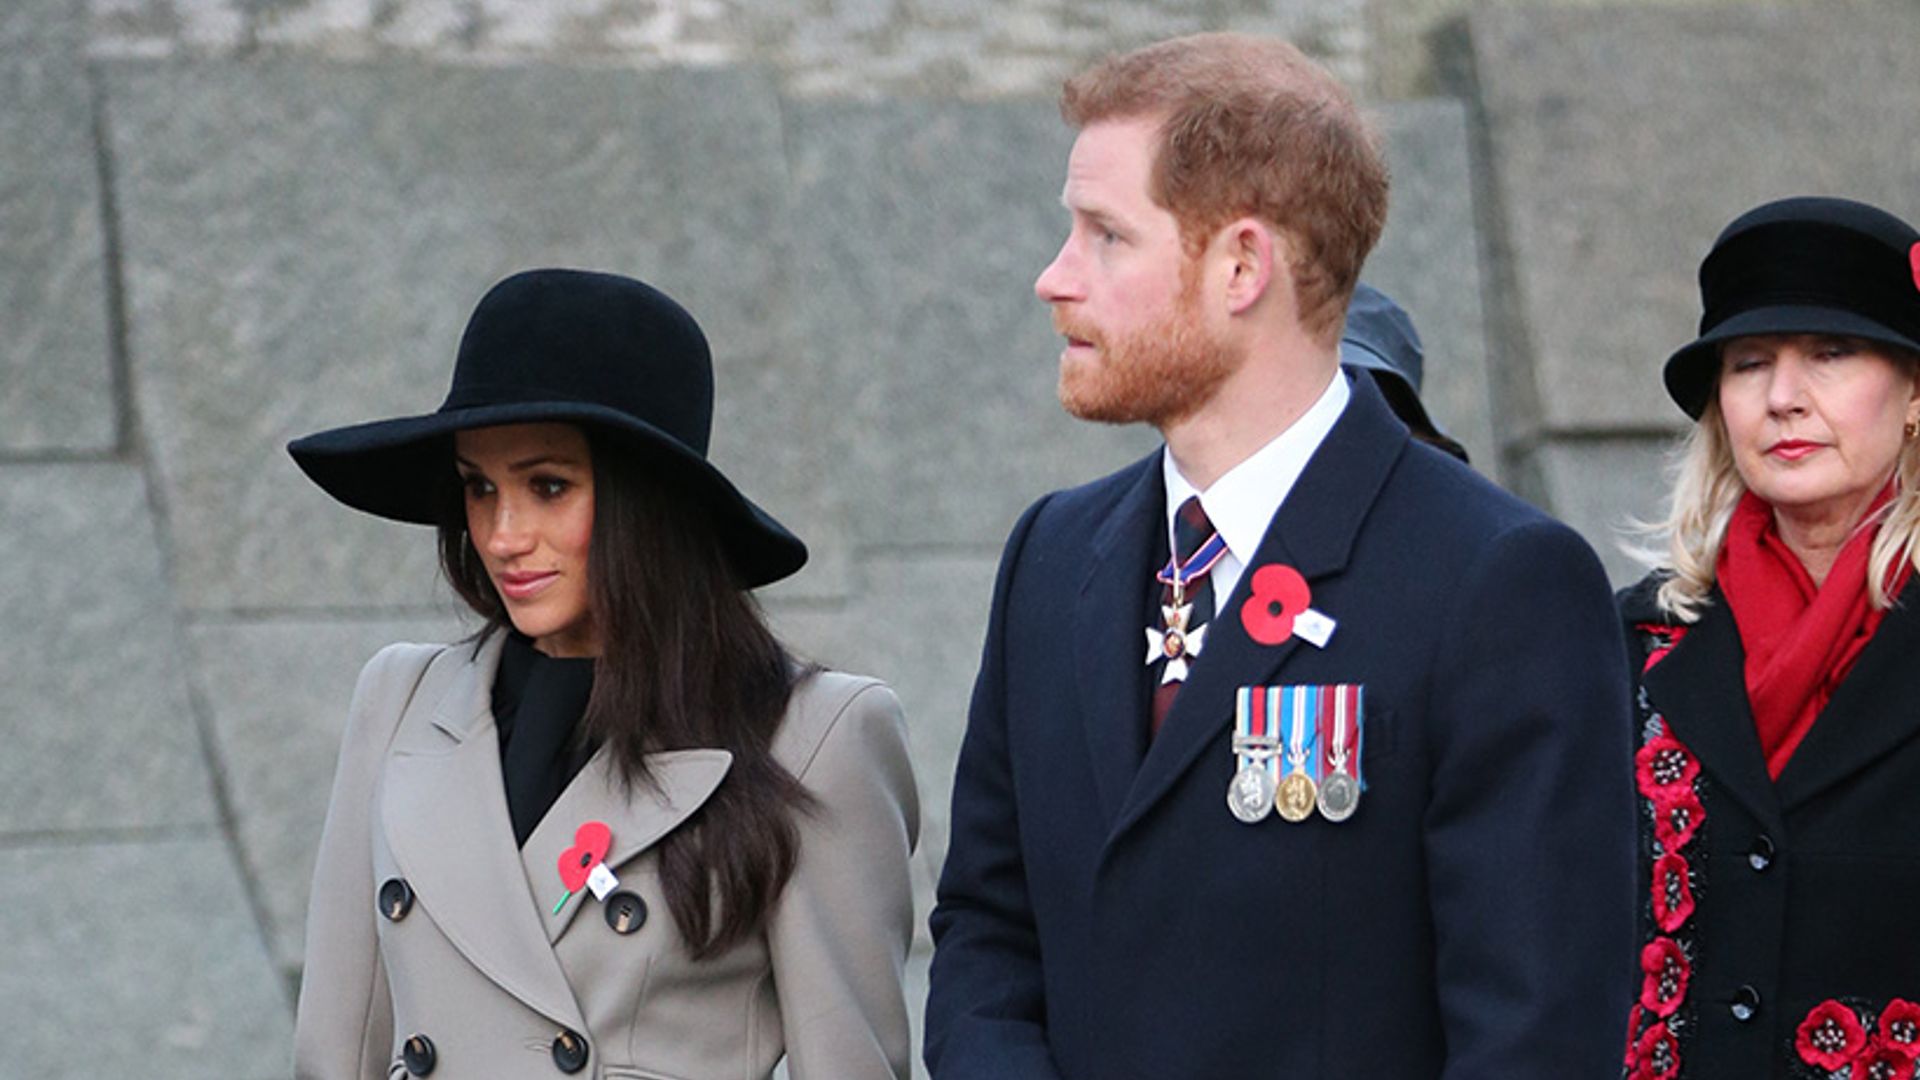 Meghan Markle stuns as she joins Prince Harry at early morning engagement